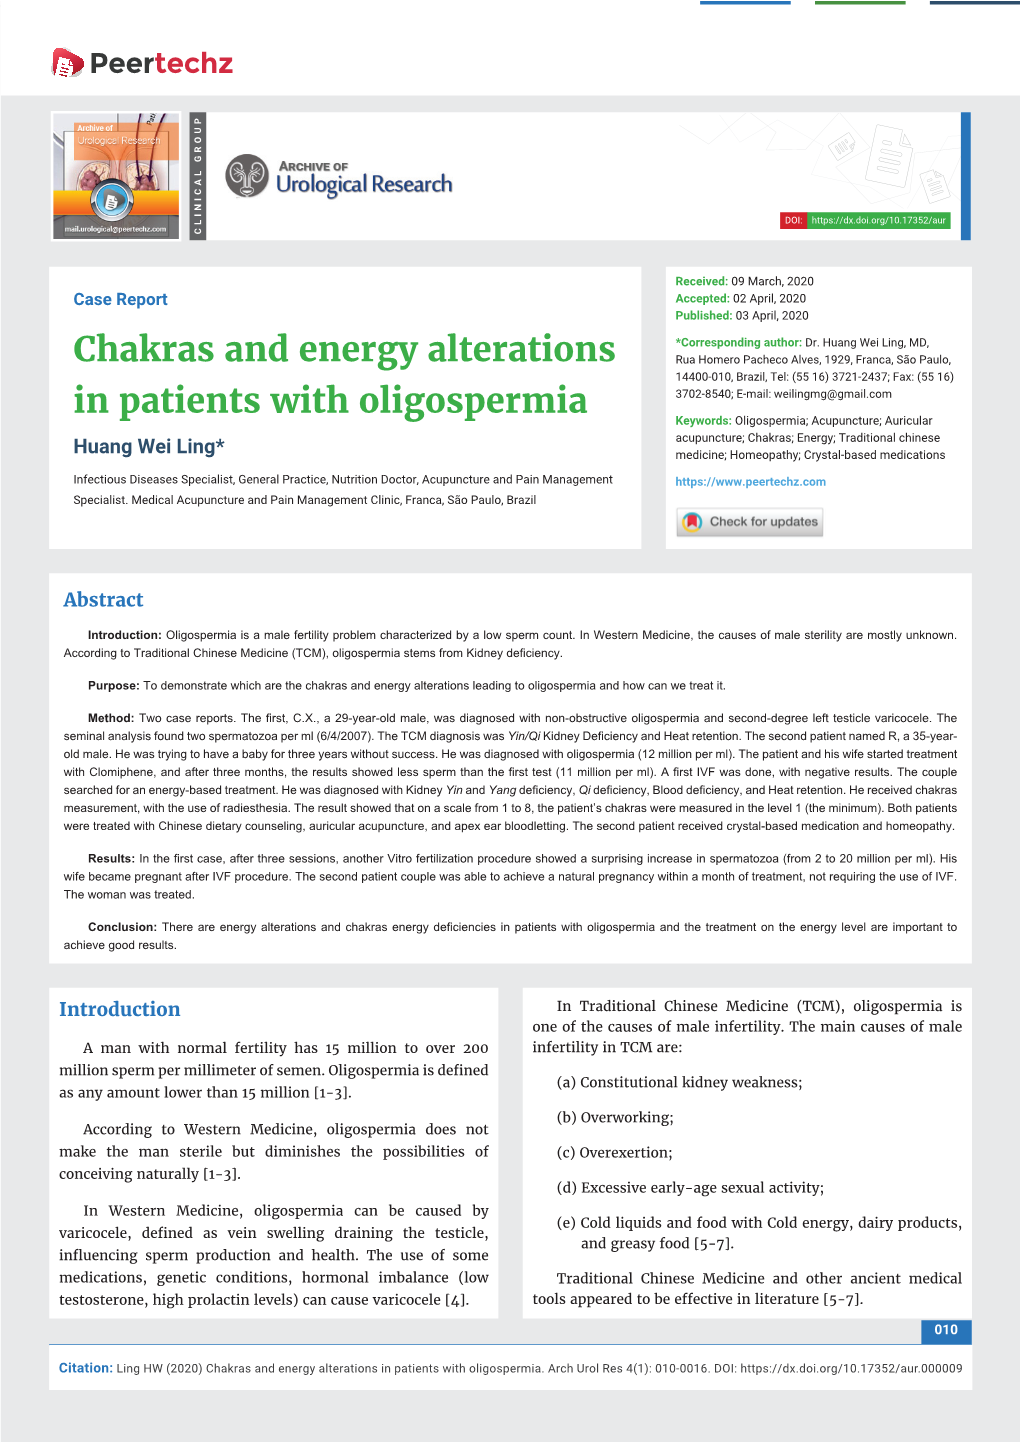 Chakras and Energy Alterations in Patients with Oligospermia